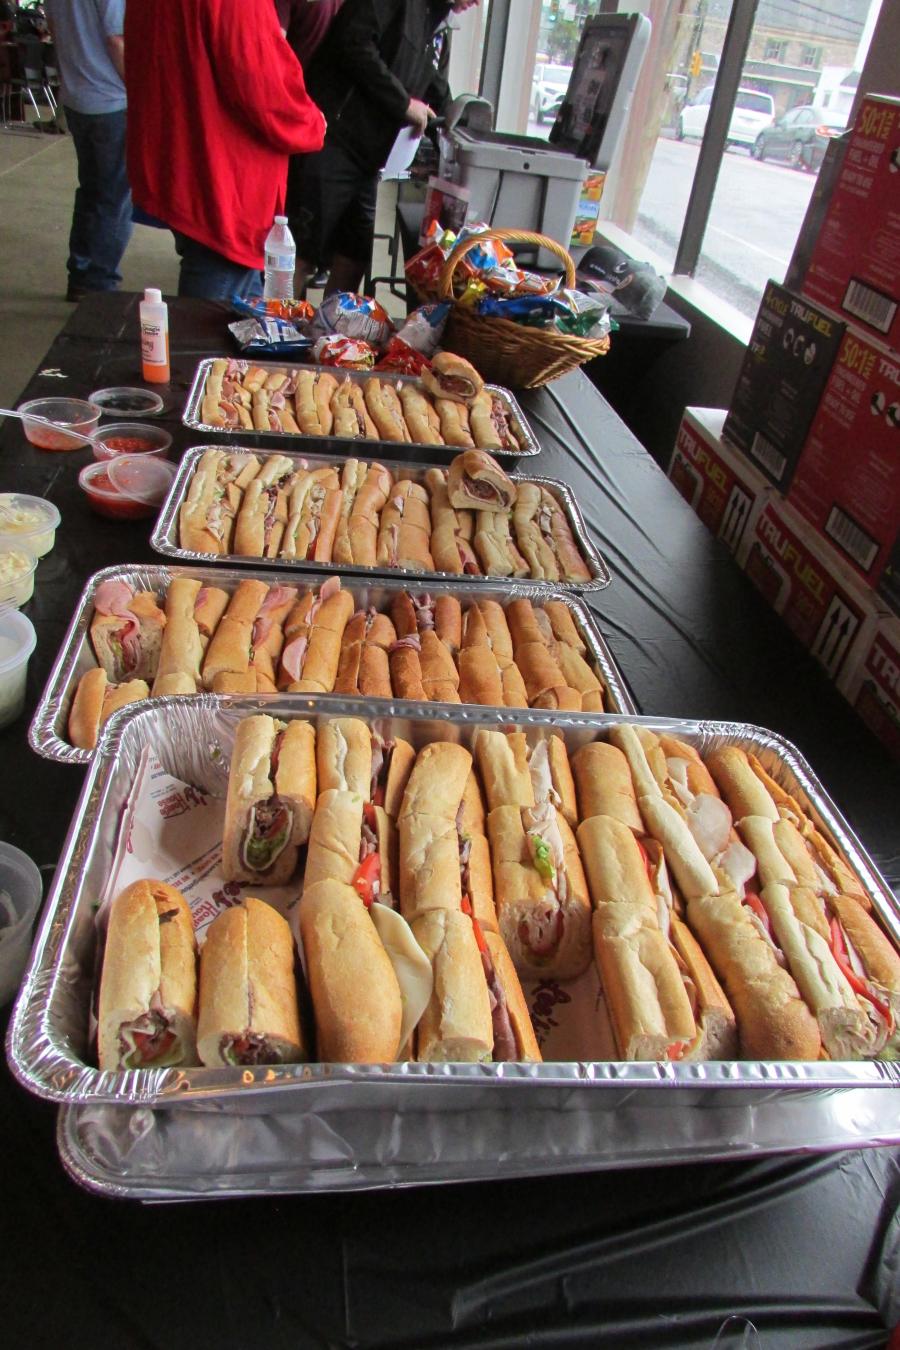 Guests enjoyed a lunch, compliments of Eagle Power Turf & Tractor and Lee’s Hoagie House.
(CEG photo)